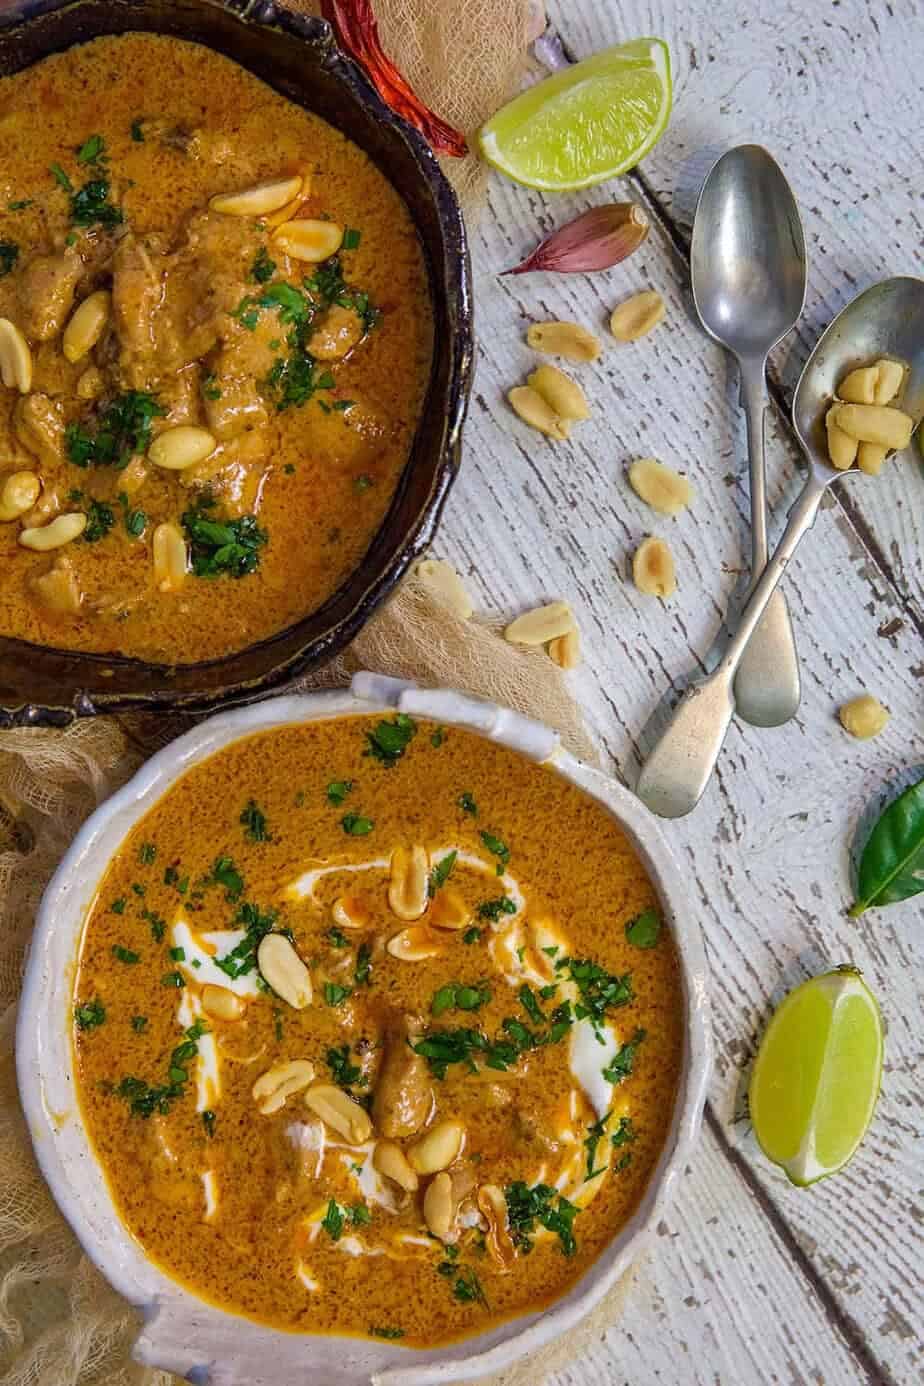 Chicken curry in a white bowl